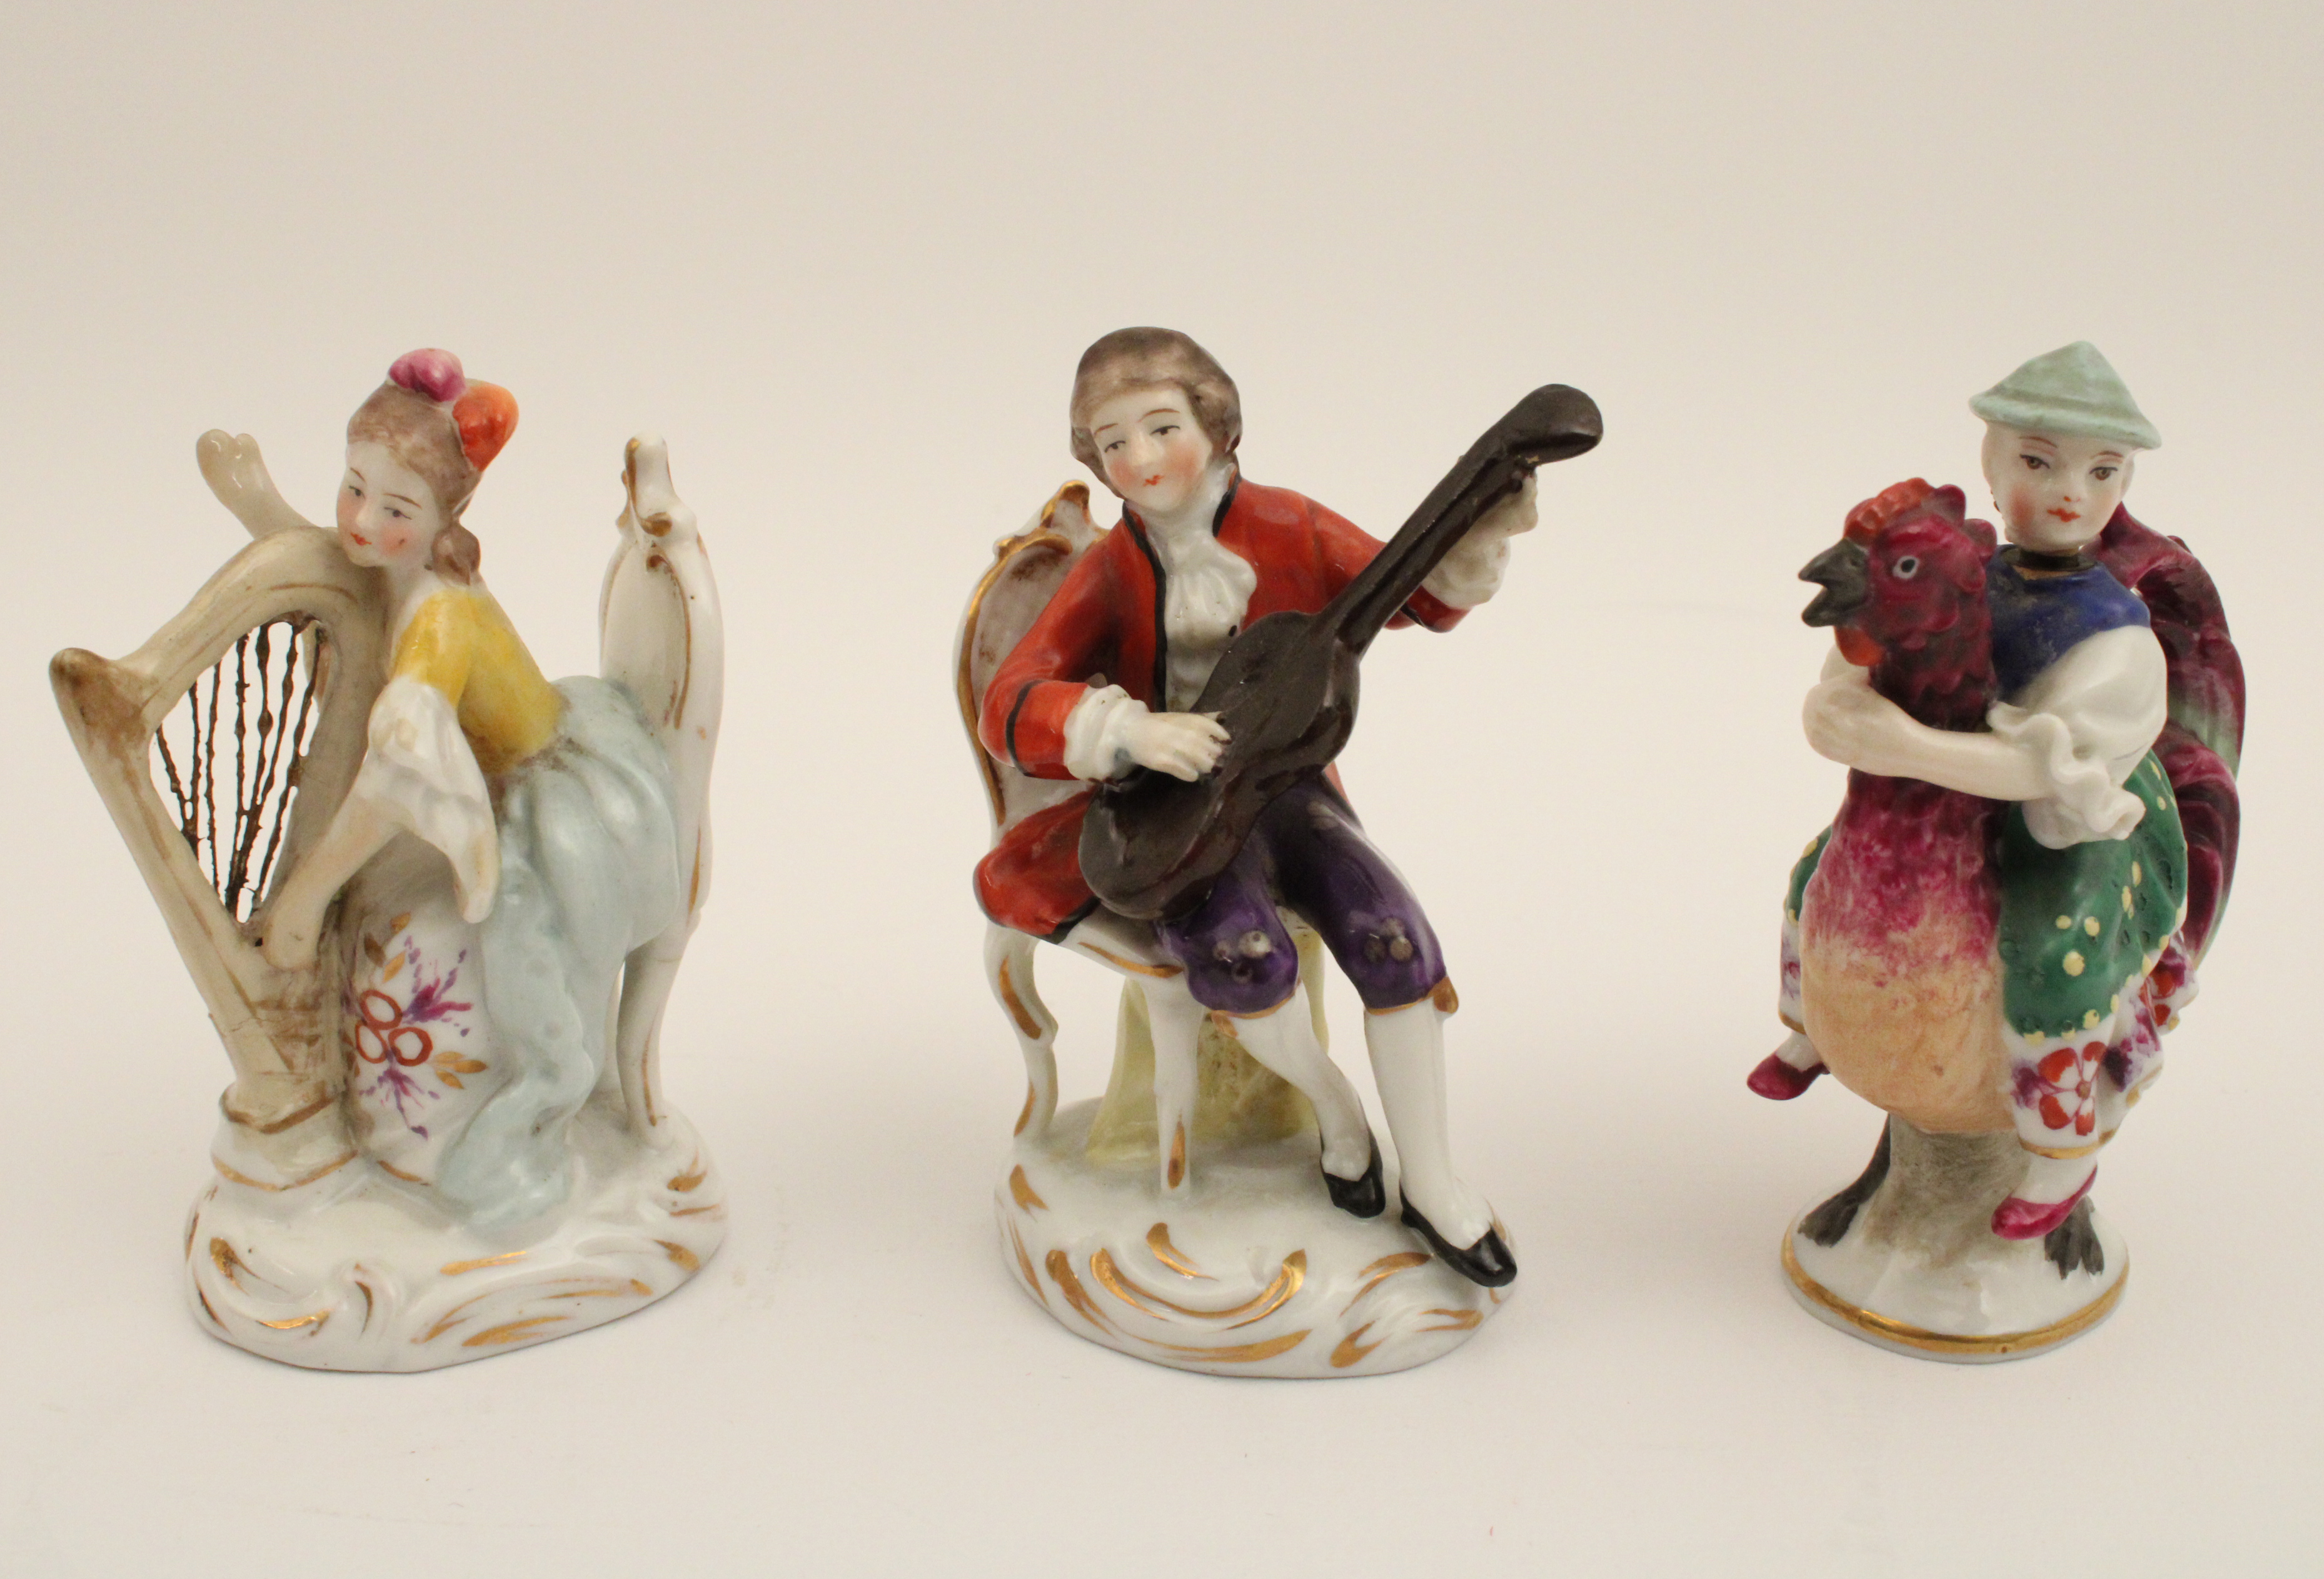 GROUP OF 3 SAXONY PORCELAIN FIGURINES